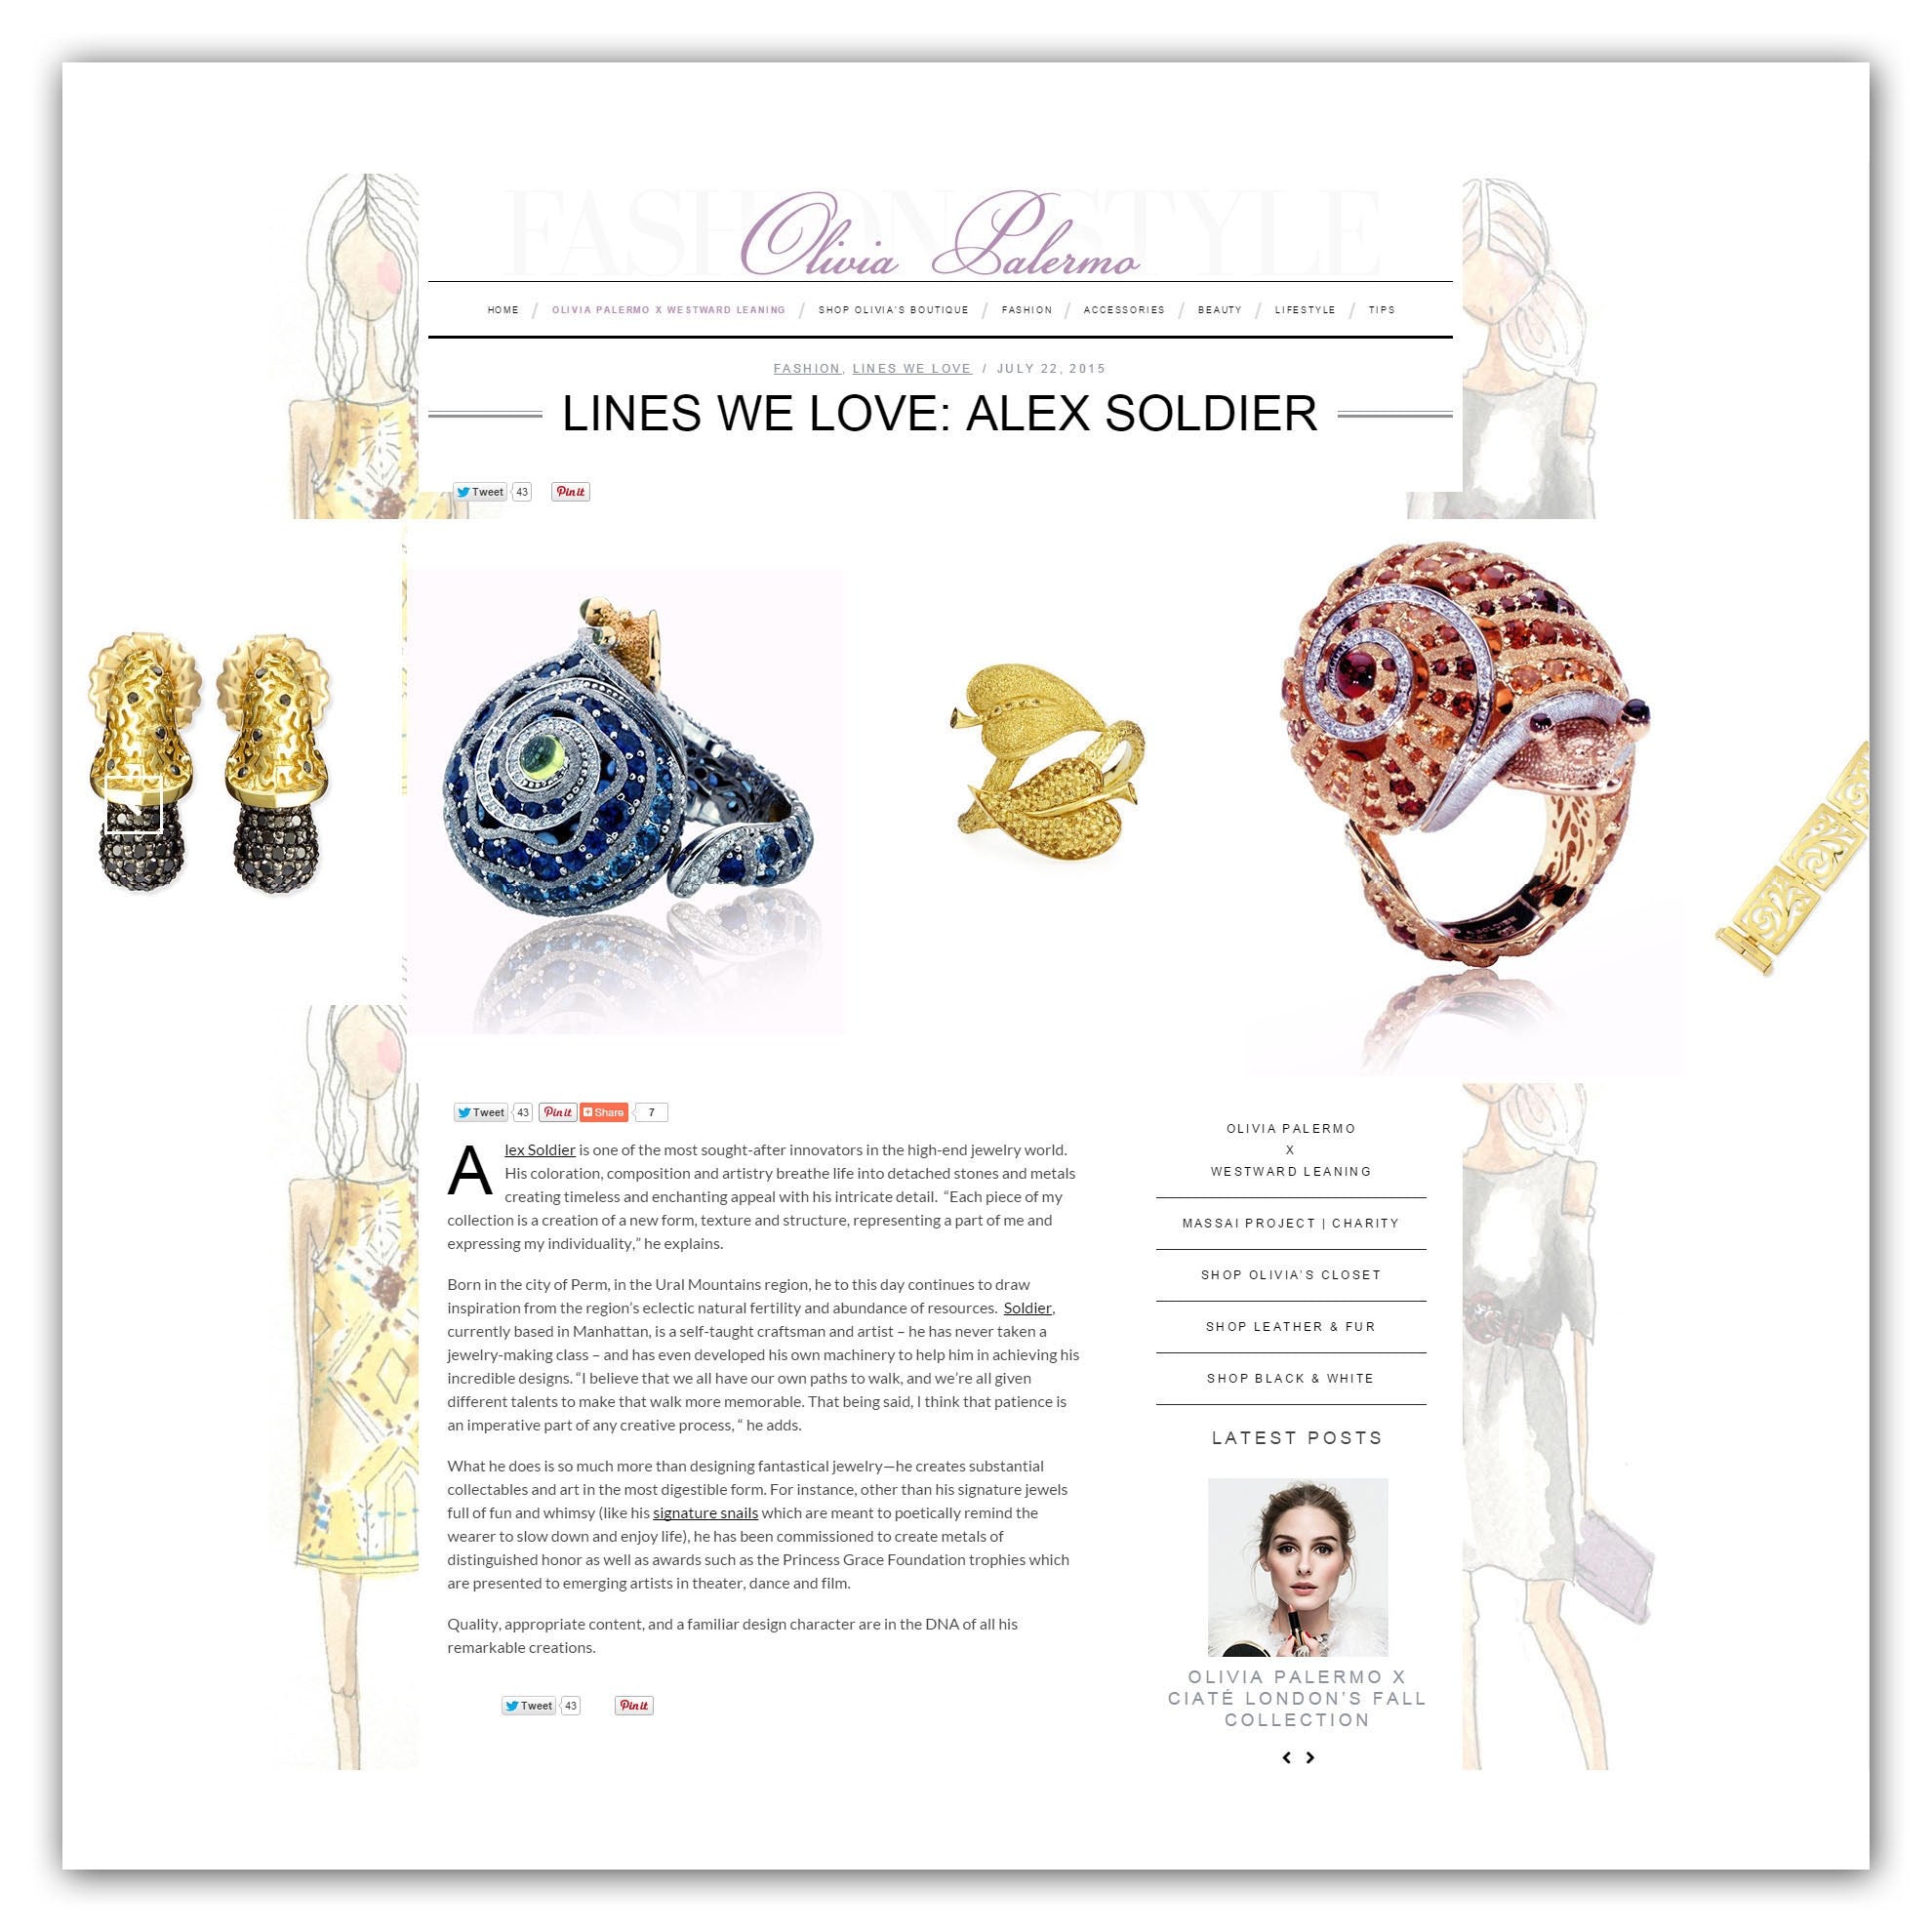 Olivia Palermo's "Lines We Love: Alex Soldier" publication features Gold Acorn Earrings, Gold Snail Rings with Gemstones and Yellow Gold Leaf Doublet